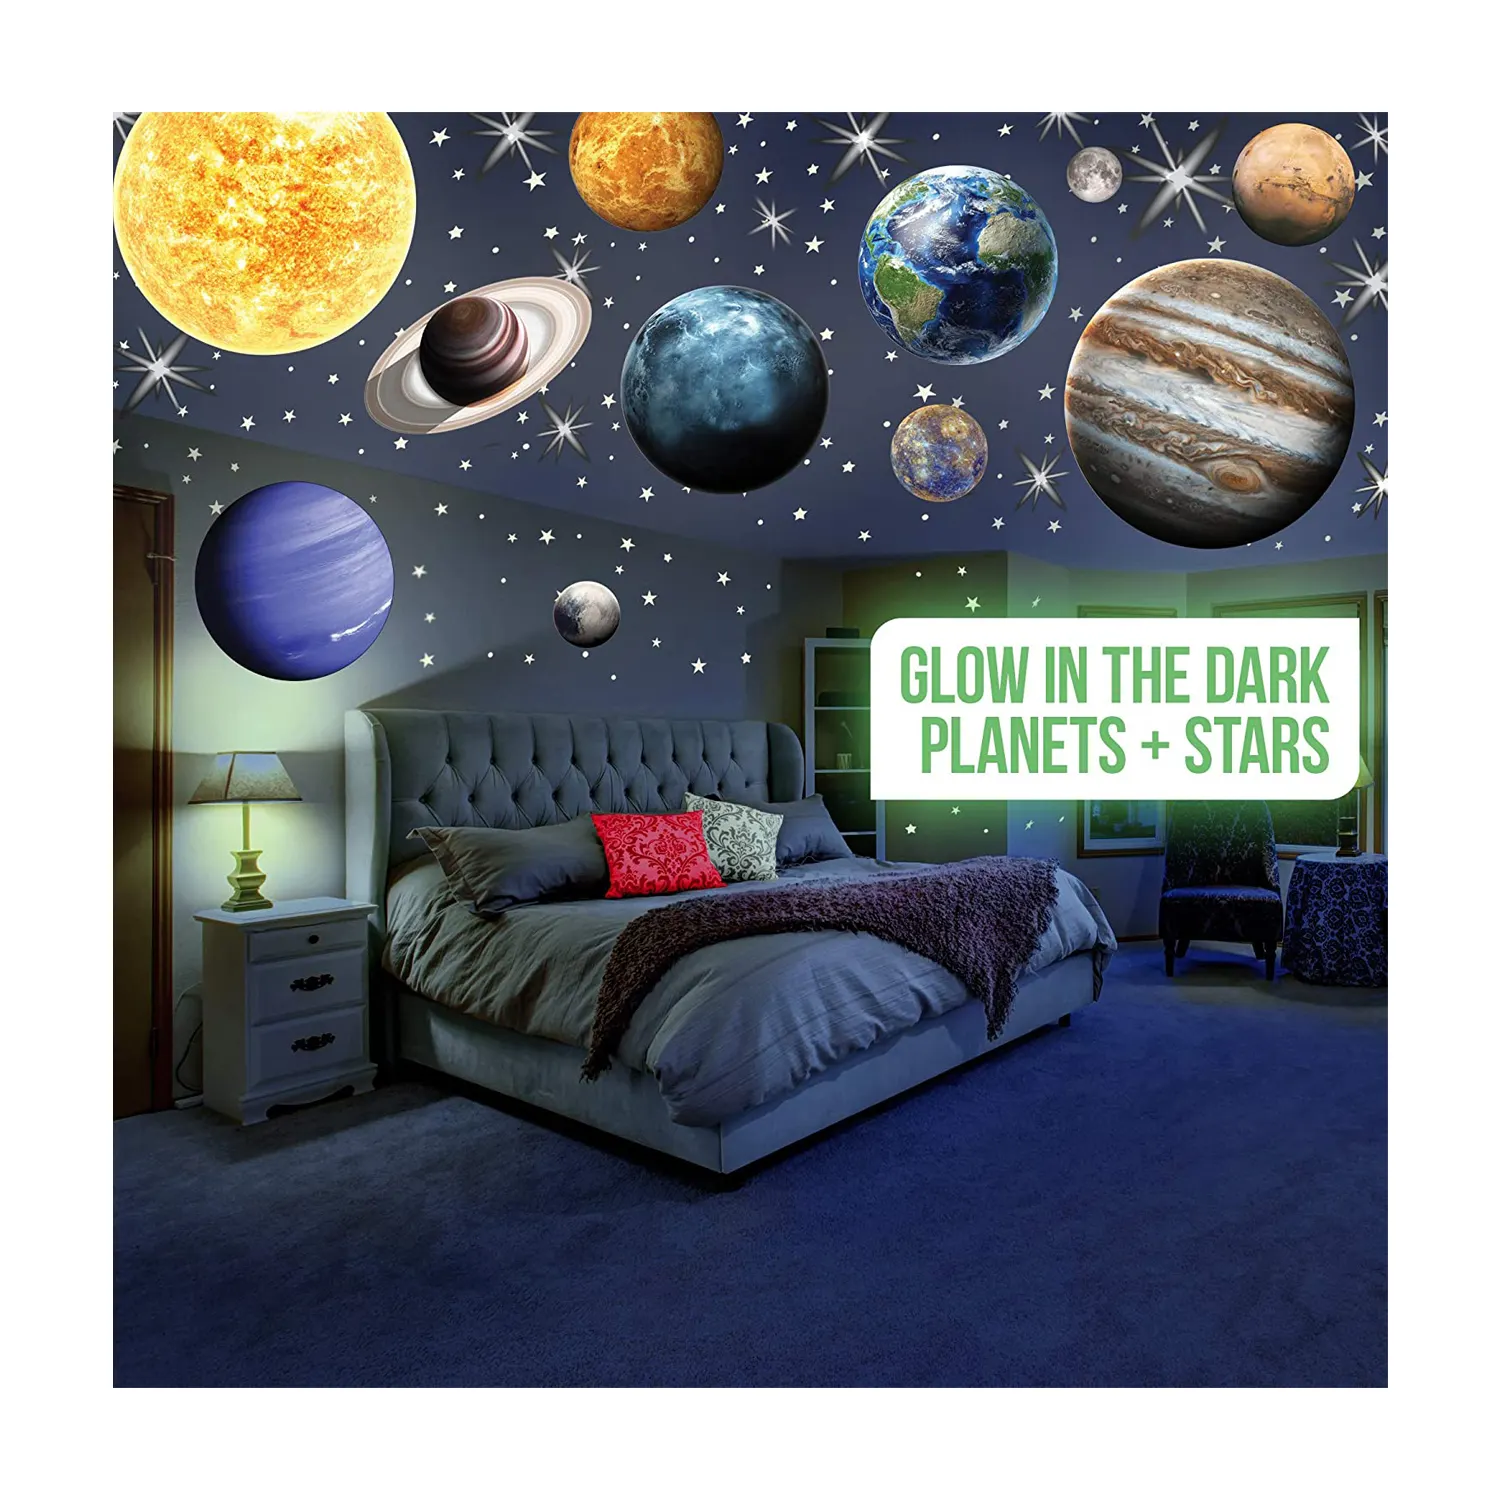 Glow in The Dark Planets Stickers Sun Earth Mars Glowing Ceiling Decals for Bedroom Room Vinyl Wall Stickers 3D for Kids